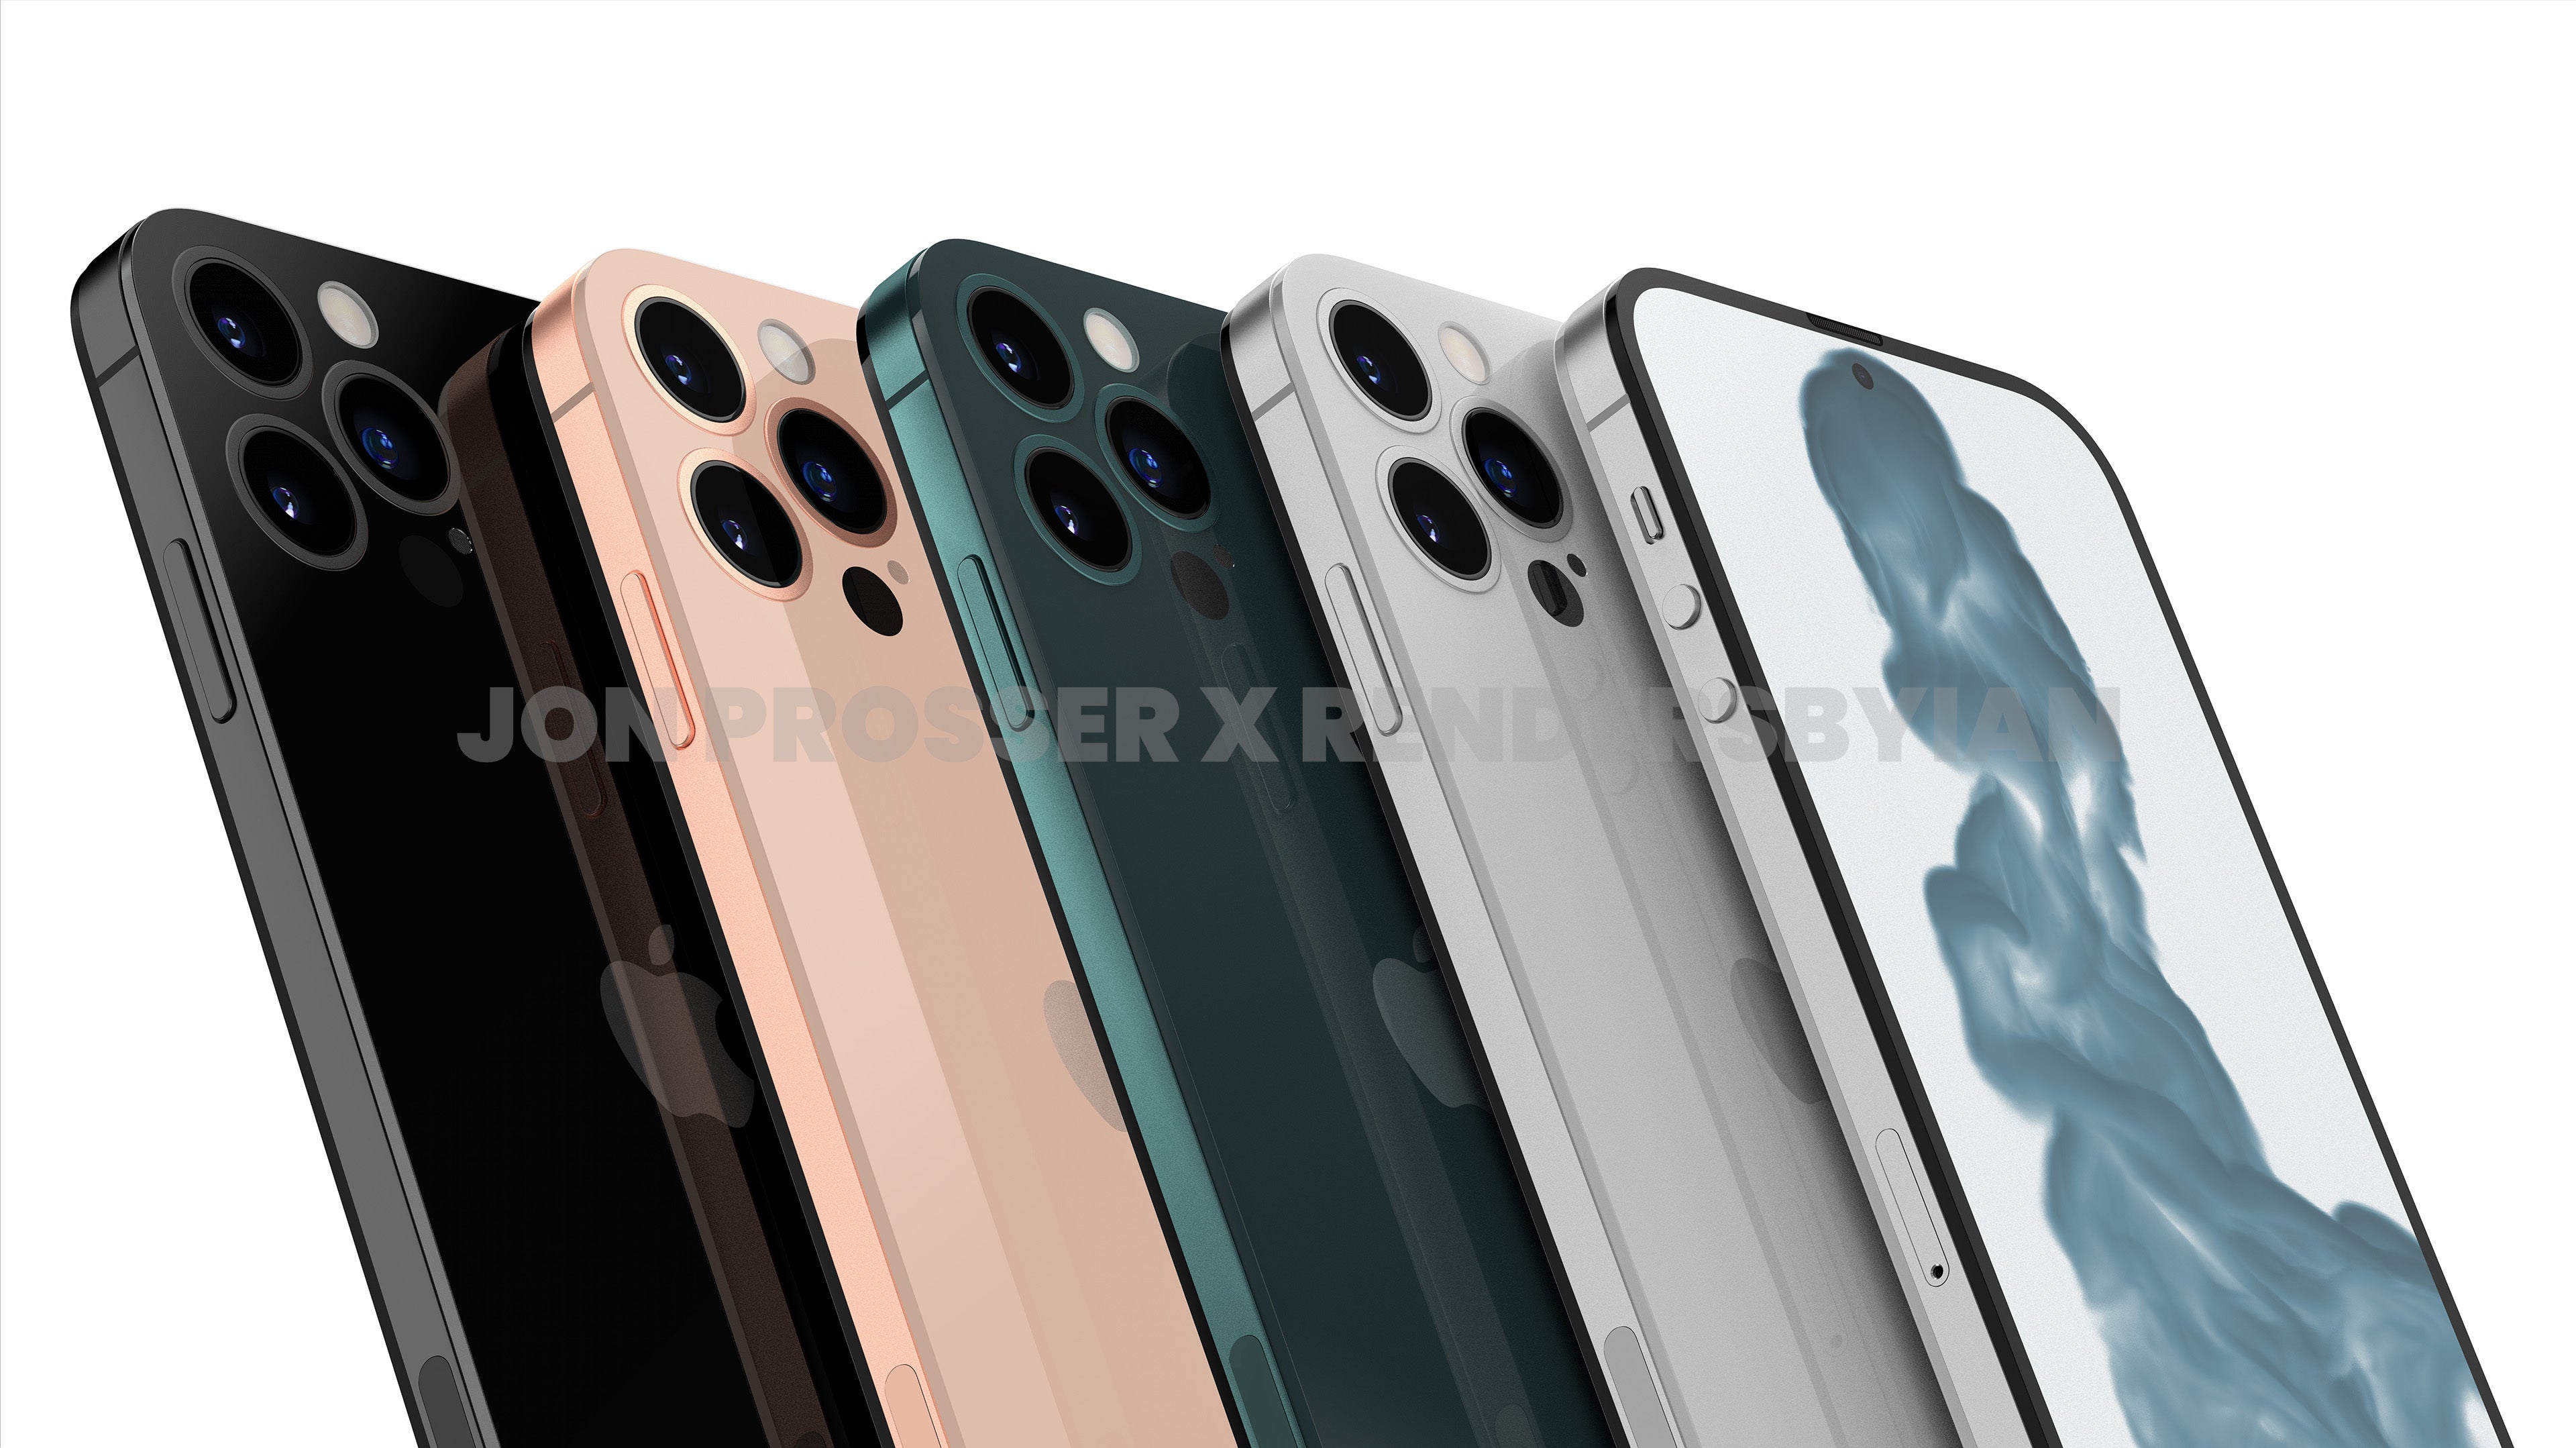 This is iPhone 14 Pro Max, says tipster  - /www.phonearena.com/news/apple-iphone-14-design-renders-leak_id134870&quot; title=&quot;Forget the iPhone 13, here&#039;s what the notchless iPhone 14 could look like&quot; class=&quot;previewtooltip&quot; data-id=&quot;134870&quot; data-type=&quot;article&quot; rel=&quot;&quot;&gt;Jon Prosser. - Hi and Goodbye iPhone 13 mini: iPhone 14 Max to replace Apple’s biggest small mistake - but why?